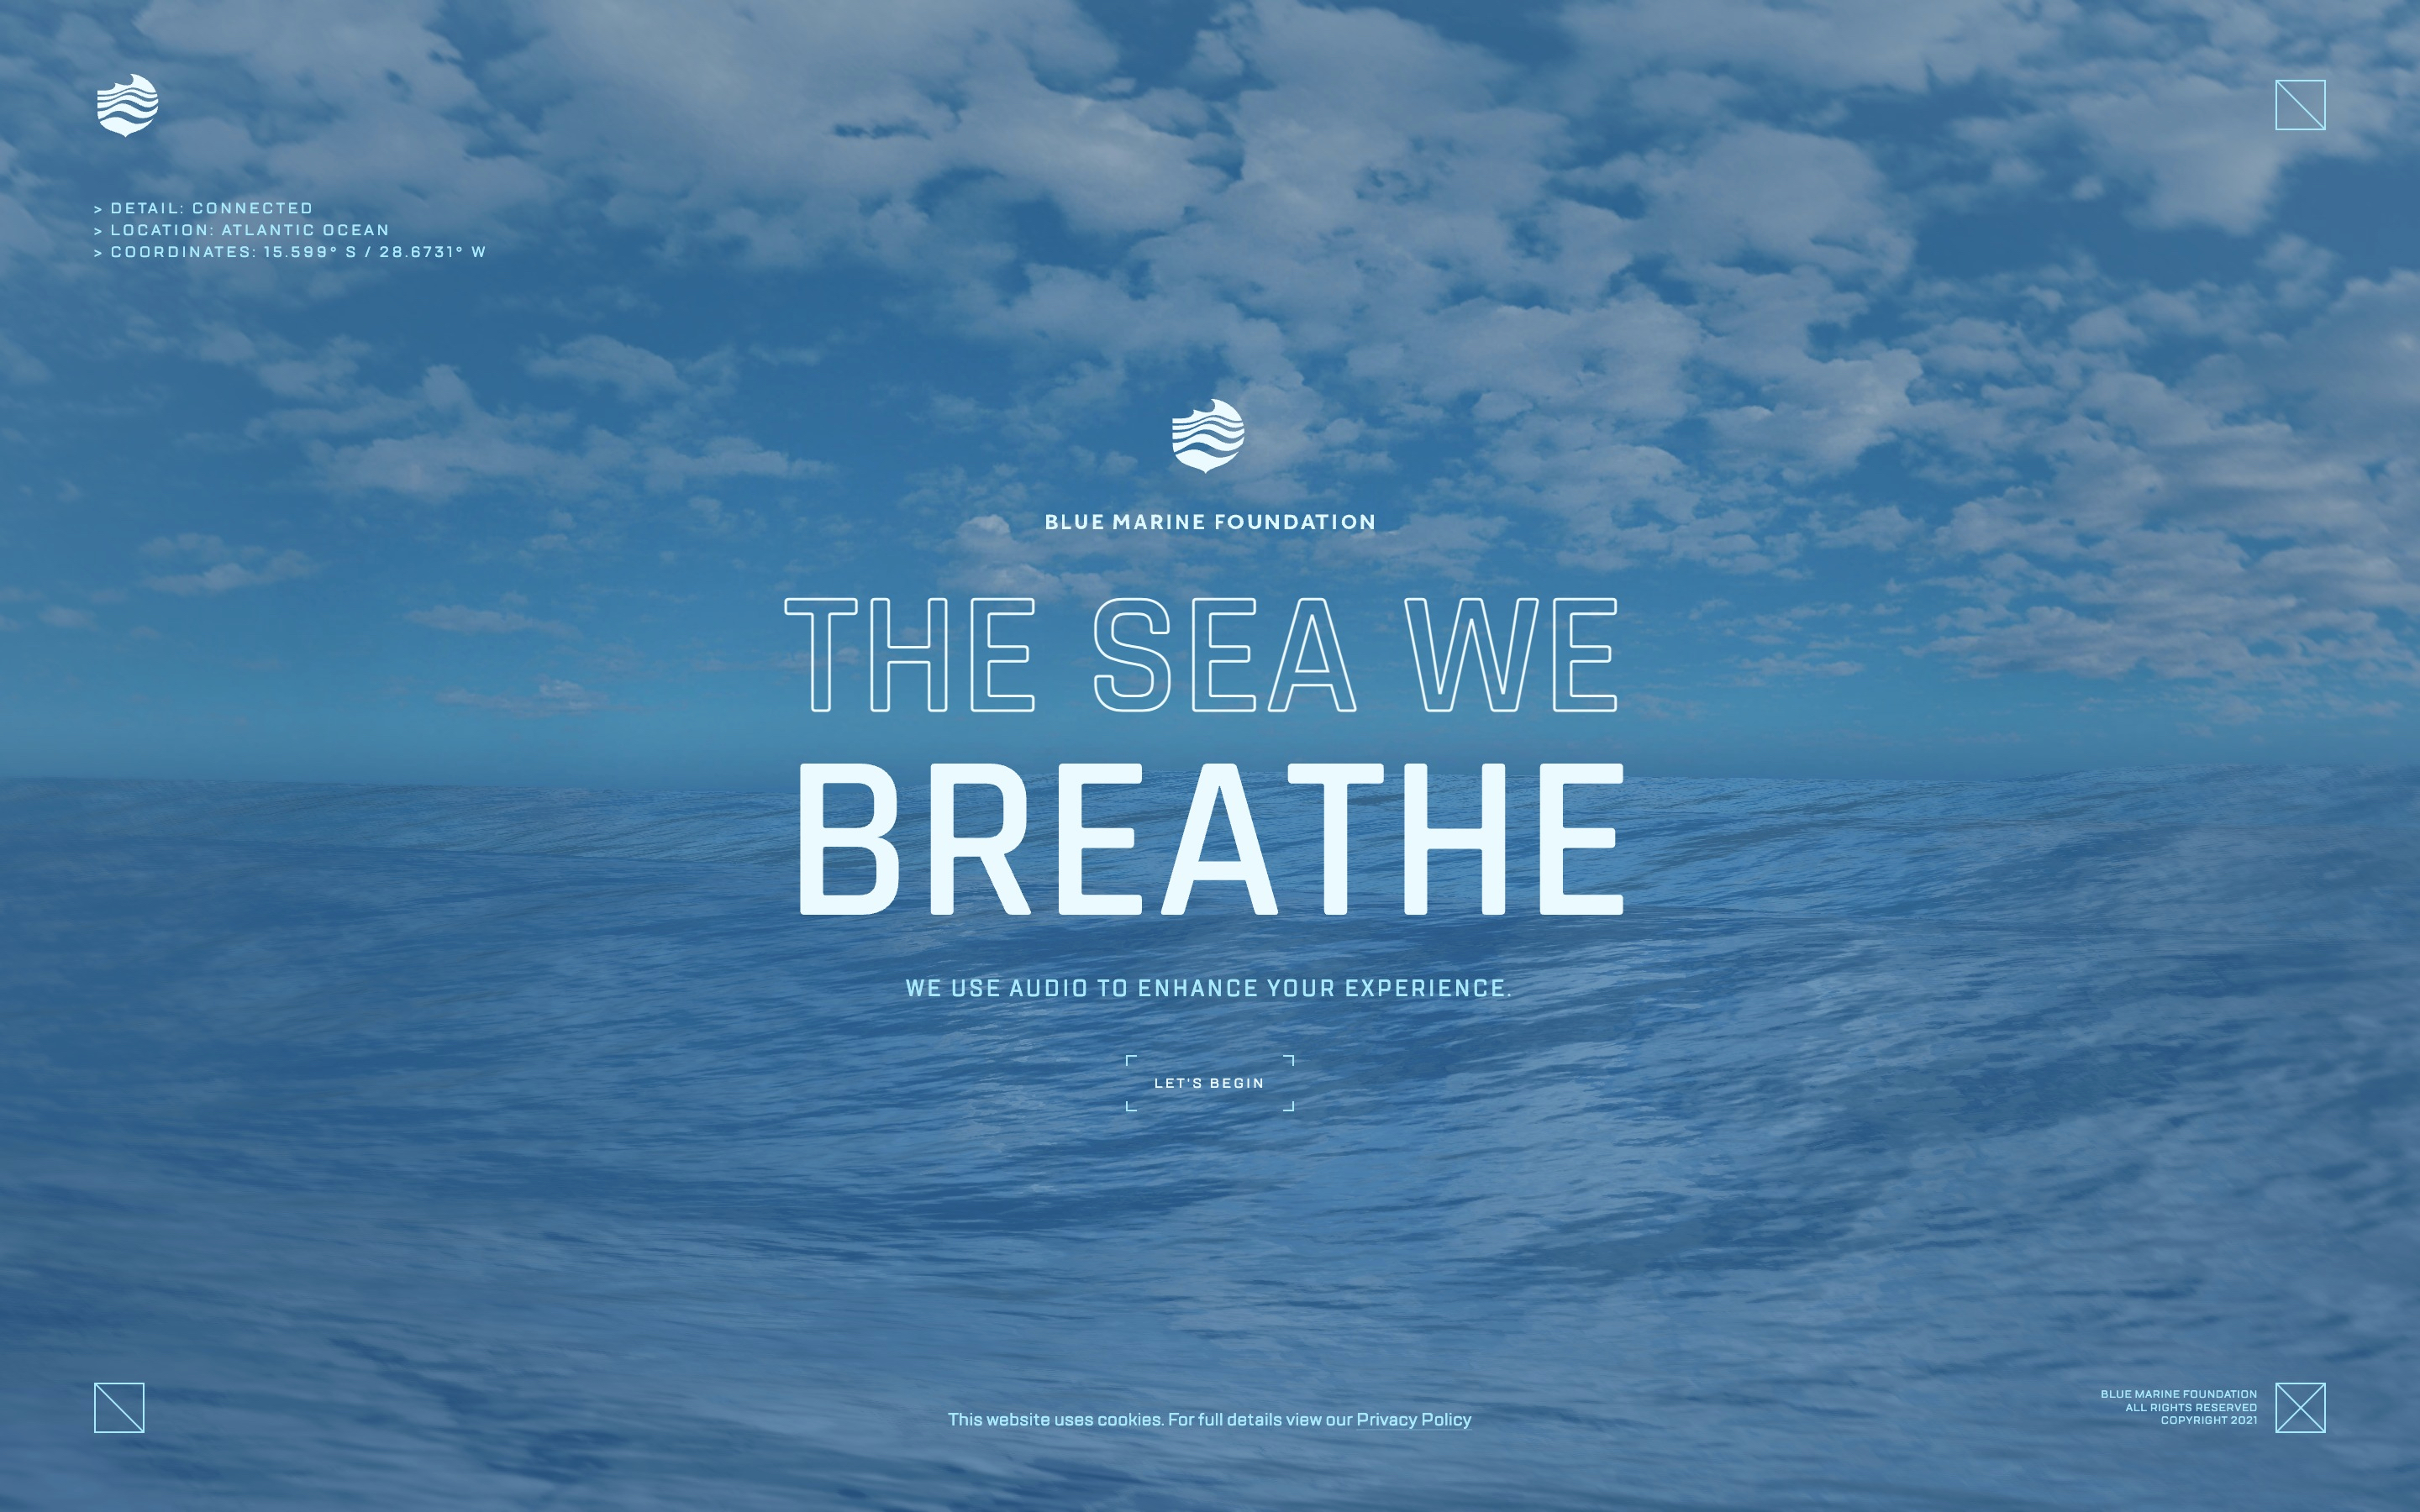 A screenshot showing the top banner of the 'The Sea We Breathe' website.